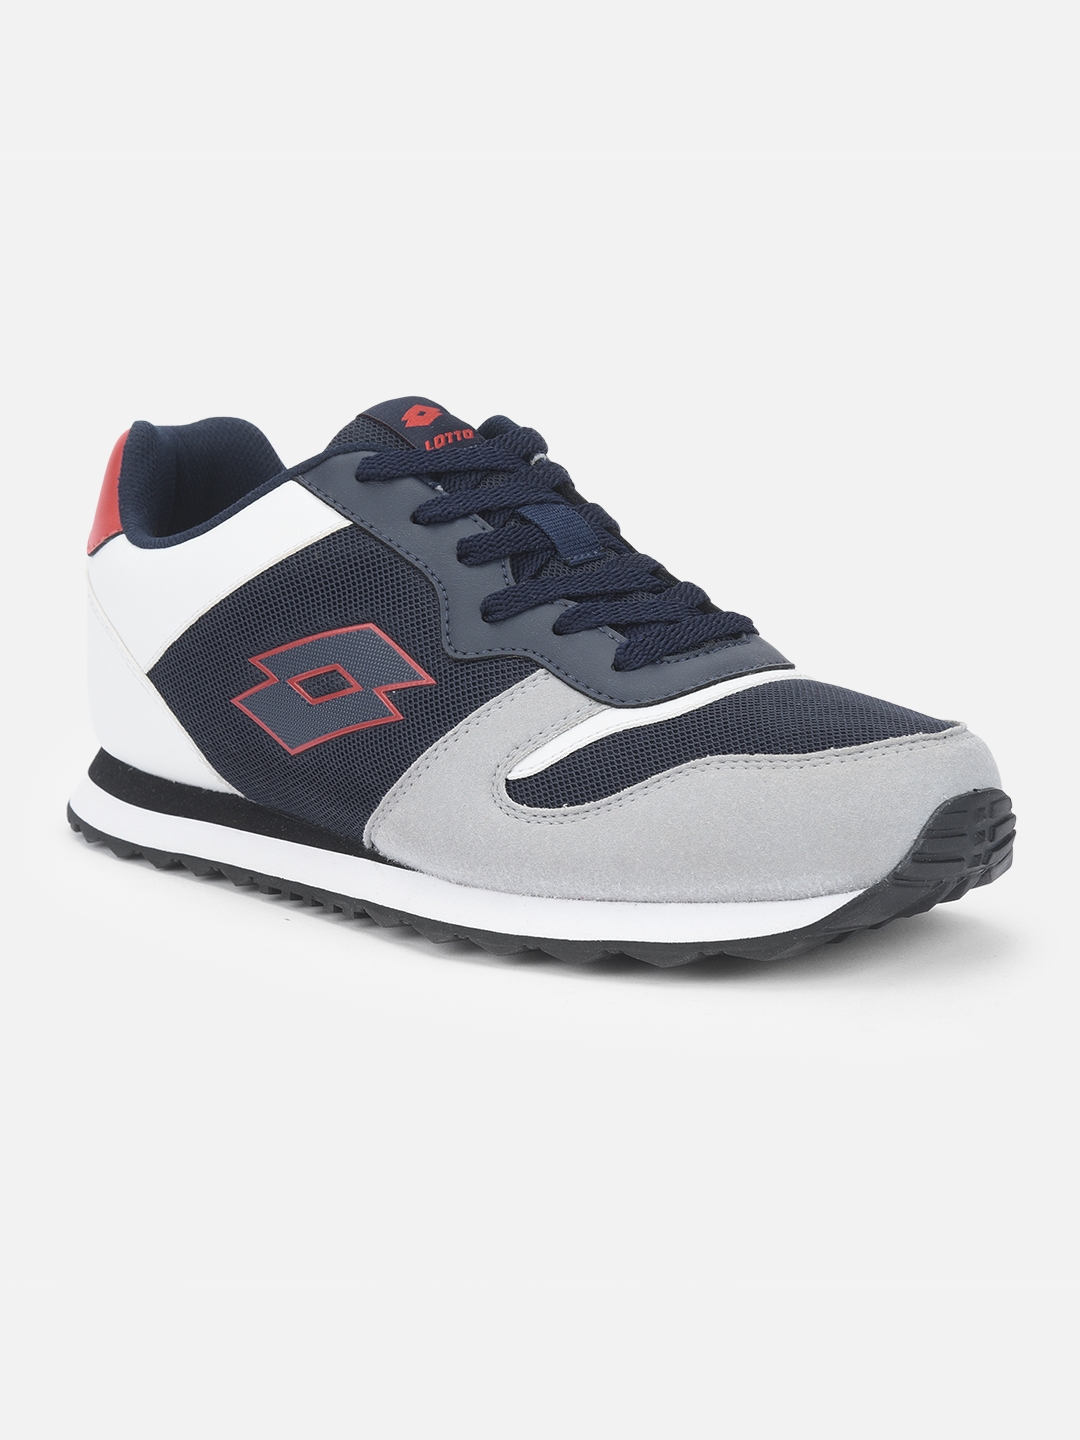 Lotto | LOTTO MEN TRAINER WEDGE LIFESTYLE SHOES